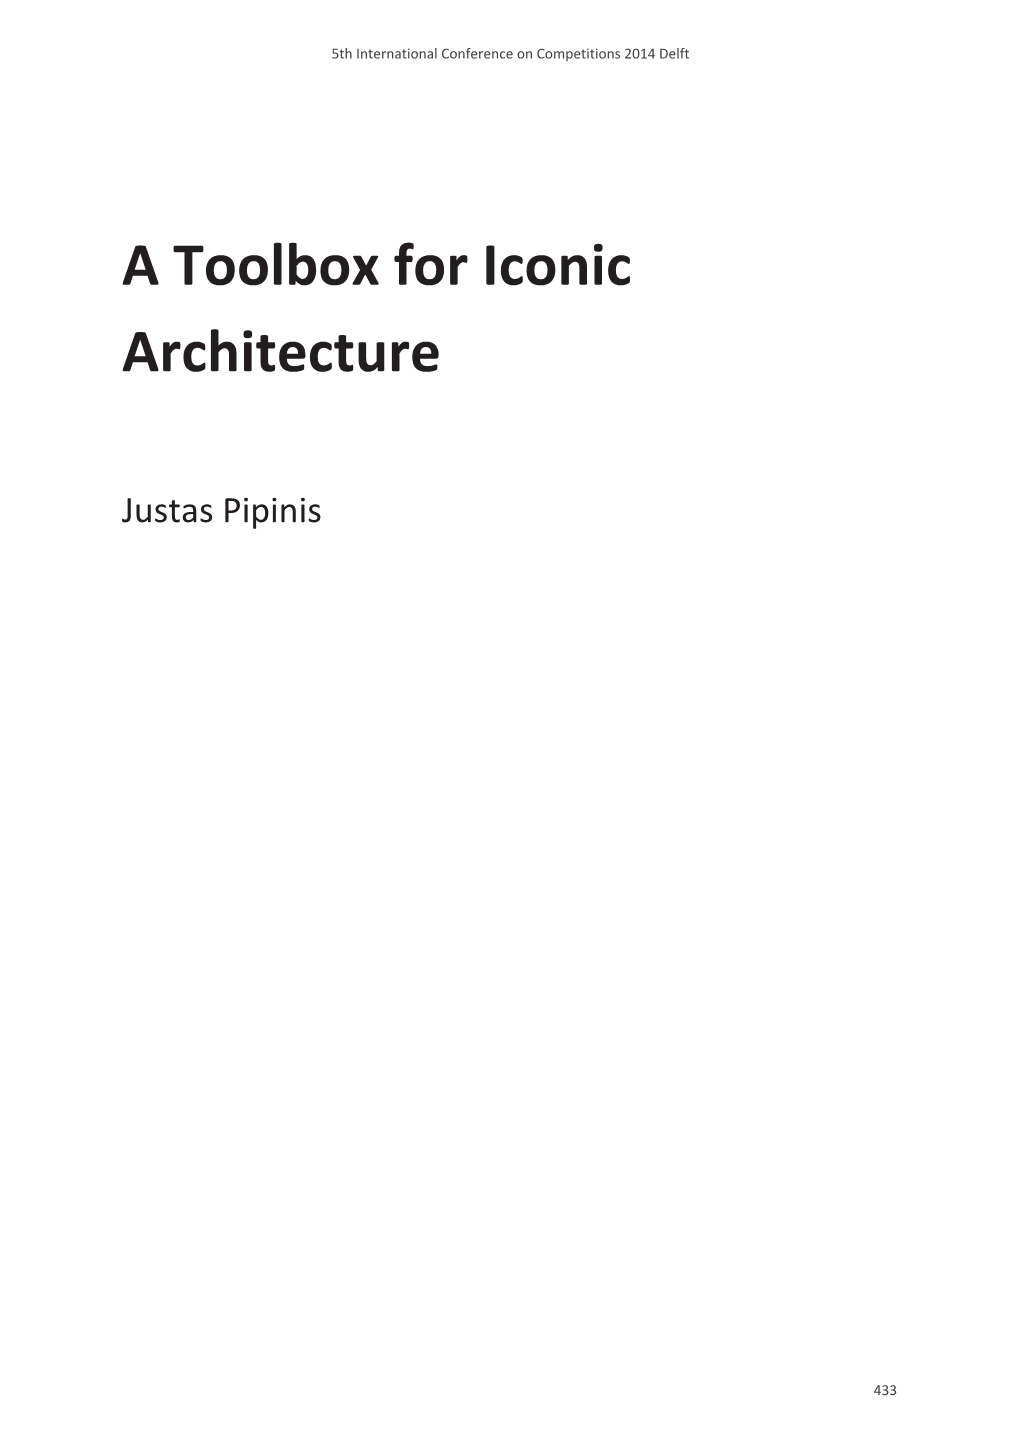 A Toolbox for Iconic Architecture